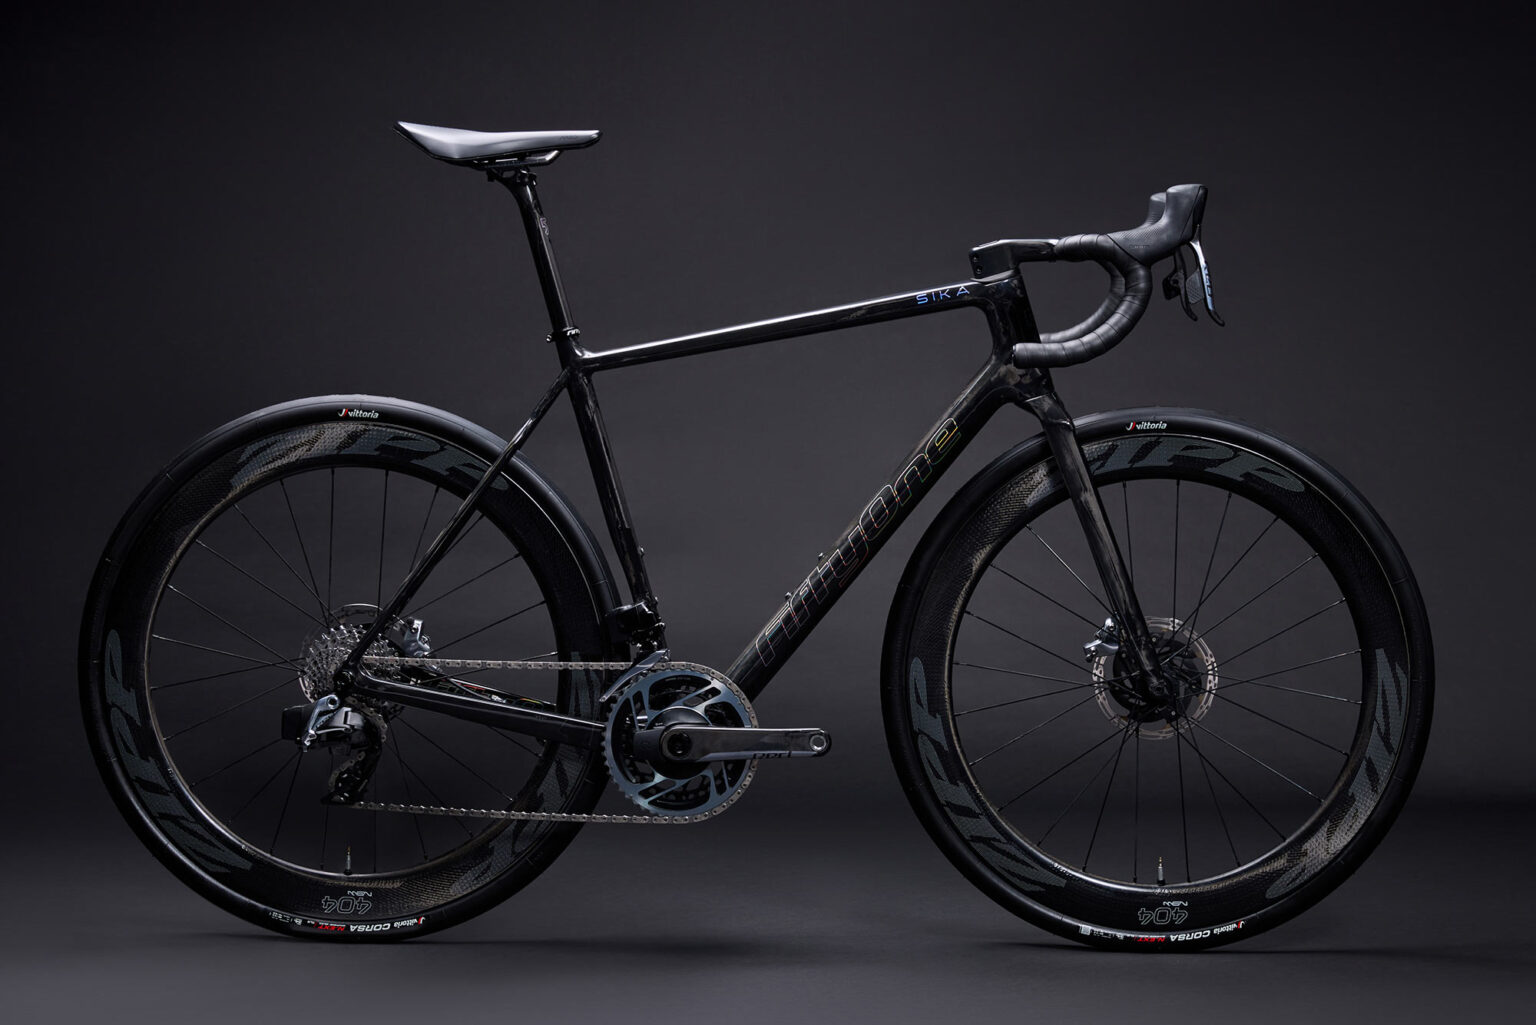 fiftyone sika road bike shown from side